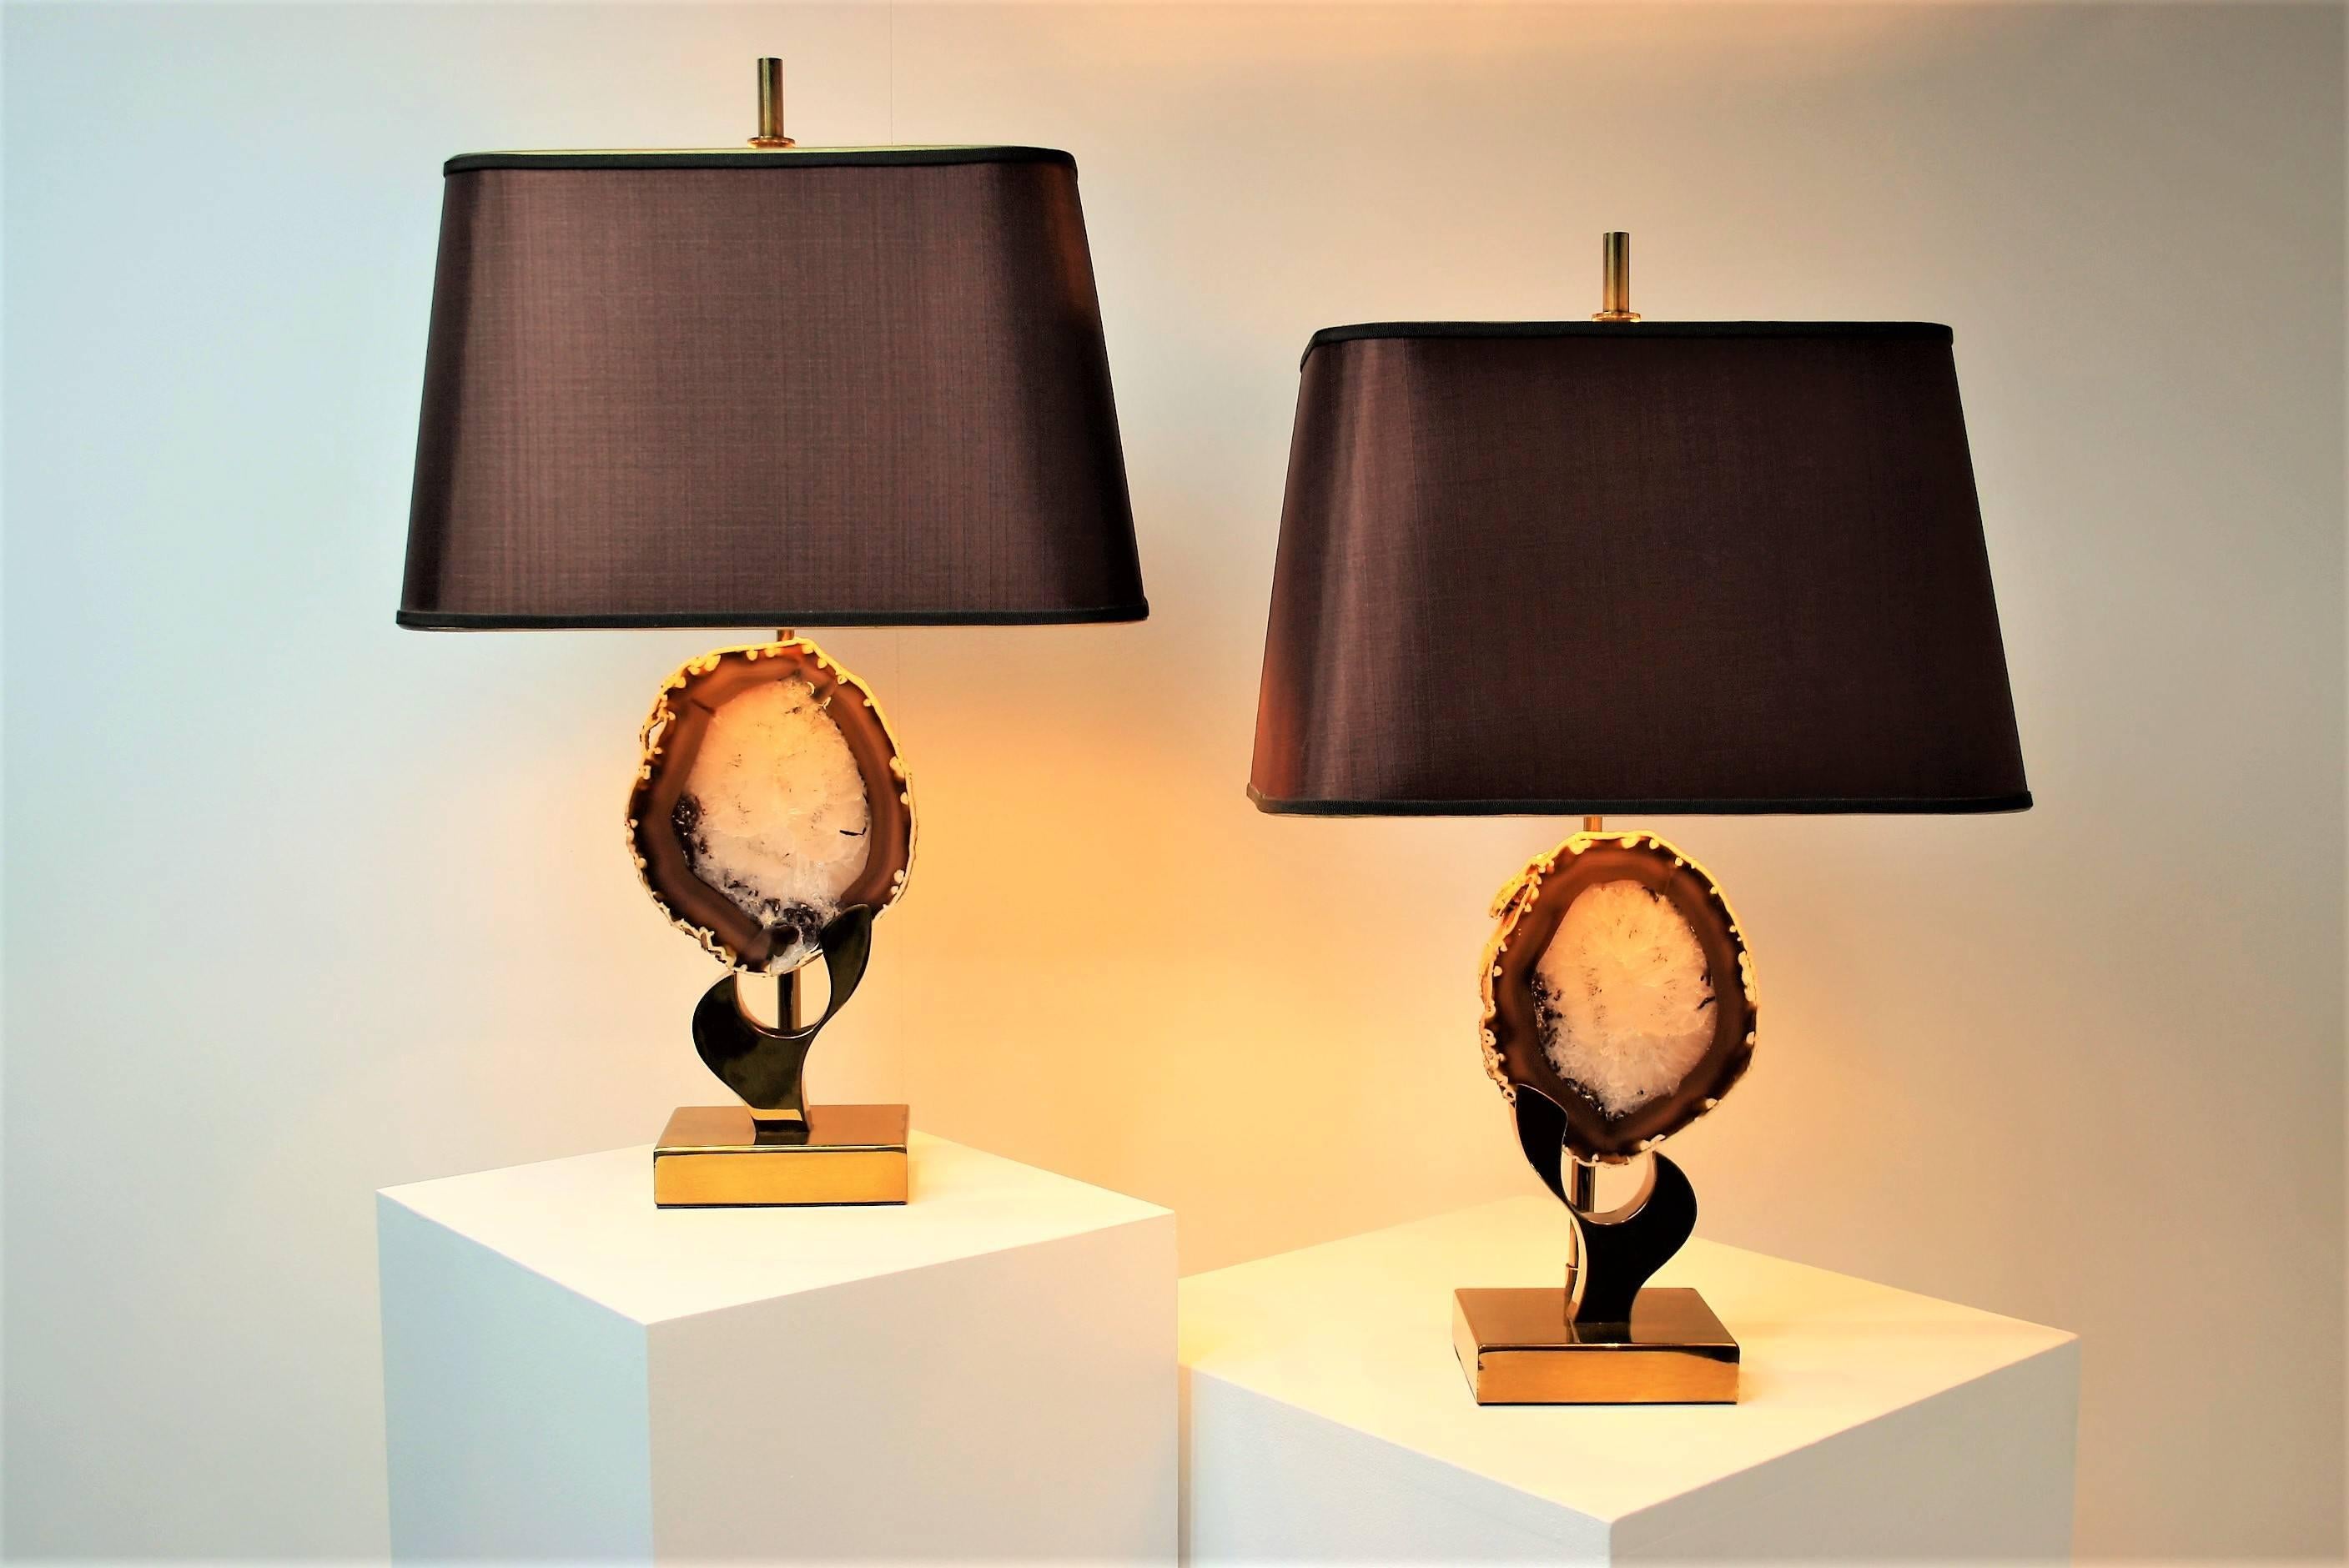 Very nice original pair of Willy Daro brass and agate table lamps,
Belgium, circa 1970.             
The original shades measures are: 22 cm H x 35 cm L x 18 cm D.
The measures of the agates are: 17 cm H x 14 cm L x 2.5 cm D.
The total high is 58 cm